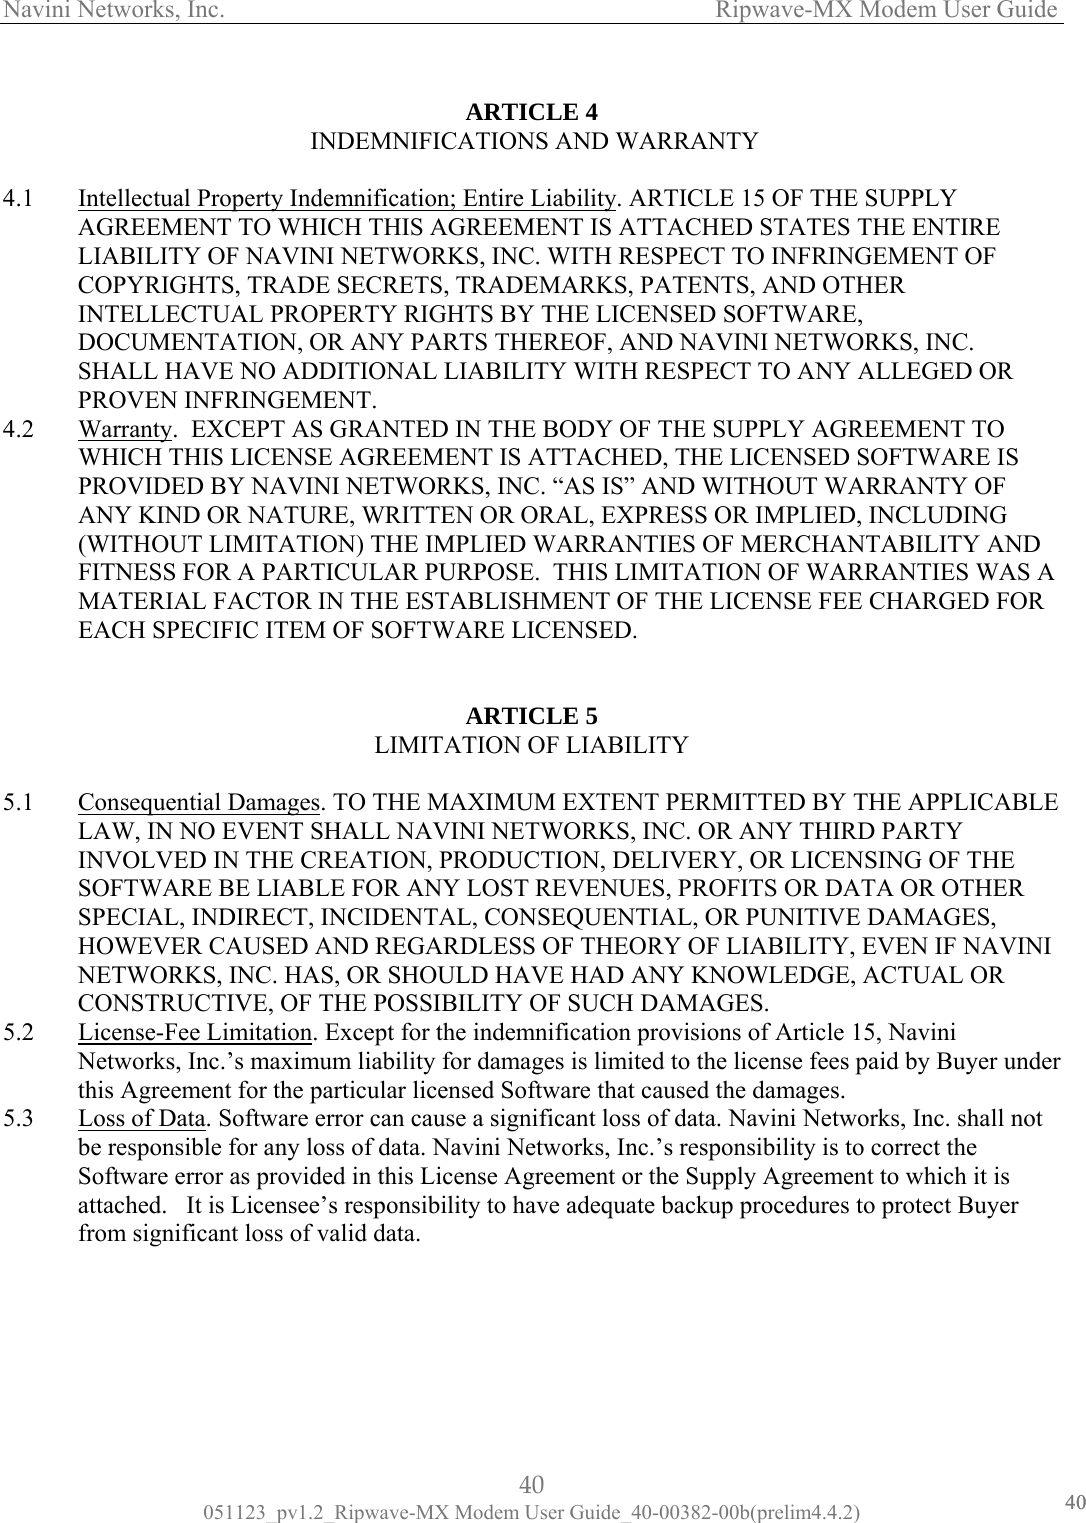 Navini Networks, Inc.                   Ripwave-MX Modem User Guide  ARTICLE 4 4.1  Intellectual Property Indemnifica INDEMNIFICATIONS AND WARRANTY   tion; Entire Liability. ARTICLE 15 OF THE SUPPLY AGREEMENT TO WHICH THIS AGREEMENT IS ATTACHED STATES THE ENTIRE LIABILITY OF NAVINI NETWORKS, I TH RESPECT TO INFRINGEMENT OF COPYRIGHTS, TRADE SECRETS, TRADEMARKS, PATENTS, AND OTHER INTELLECTUAL PROPERTY RIGHTS BY THE LICENSED SOFTWARE, DOCUMENTATION, OR ANY PARTS THEREOF, AND NAVINI NETWORKS, INC. SHALL HAVE NO ADDITION SPECT TO ANY ALLEGED OR PROVEN INFRINGEMENT. NC. WIAL LIABILITY WITH RE4.2 Warranty.  EXCEPT AS GRANTED IN THE BODY OF THE SUPPLY AGREEMENT TO WHICH THIS LICENSE AGREEMENT IS ATTACHED, THE LICENSED SOFTWARE IS PROVIDED BY NAVINI NETWORKS, INC. “AS IS” AND WITHOUT WARRANTY OF ANY KIND OR NATURE, WRITTEN OR ORAL, EXPRESS OR IMPLIED, INCLUDING (WITHOUT LIMITATION) THE IMP ANTIES OF MERCHANTABILITY AND FITNESS FOR A PARTICULAR PURPOSE.  THIS LIMITATION OF WARRANTIES WAS A  LIED WARRMATERIAL FACTOR IN THE ESTABLISHMENT OF THE LICENSE FEE CHARGED FOR EACH SPECIFIC ITEM OF SOFTWARE LICENSED.  ARTICLE 5 LIMITATION OF LIABILITY   5.1 Consequential Damages. TO THE MAXIMUM EXTENT PERMITTED BY THE APPLICABLELAW, IN NO EVENT SHALL NAVINI NETWORKS, INC. OR ANY THIRD PARTY INVOLVED IN THE CREATION, PRODUCTION, DELIVERY, OR LICENSING OF THE SOFTWARE BE LIABLE FOR ANY LOST REVENUES, PROFITS OR DATA OR OTHER SPECIAL, INDIRECT, INCIDENTAL, CONSEQUENTIAL, OR PUNITIVE DAMAGES, HOWEVER CAUSED AND REGARDLESS OF THEORY OF LIABILITY, EVEN IF NAVININETWORKS, INC. HAS, OR SHOULD HAVE HAD ANY KNOWLEDGE, ACTUAL OR CONSTRUCTIVE, OF THE POSSIBILITY OF SUCH DAMAGES.   5.2 License-Fee Limitation. Except for the indemnification provisions of Article 15, Navini Networks, Inc.’s maximum liability for damages is limited to the license fees paid by Buyer unthis Agreement for the particular licensed Software that caused the damages. Loss of Datader 5.3  . Software error can cause a significant loss of data. Navini Networks, Inc. shall not be responsible for any loss of data. Navini Networks, Inc.’s responsibility is to correct the Software error as provided in this License Agreement or the Supply Agreement to which it is attached.   It is Licensee’s responsibility to have adequate backup procedures to protect Buyer from significant loss of valid data. 40 051123_pv1.2_Ripwave-MX Modem User Guide_40-00382-00b(prelim4.4.2) 4040